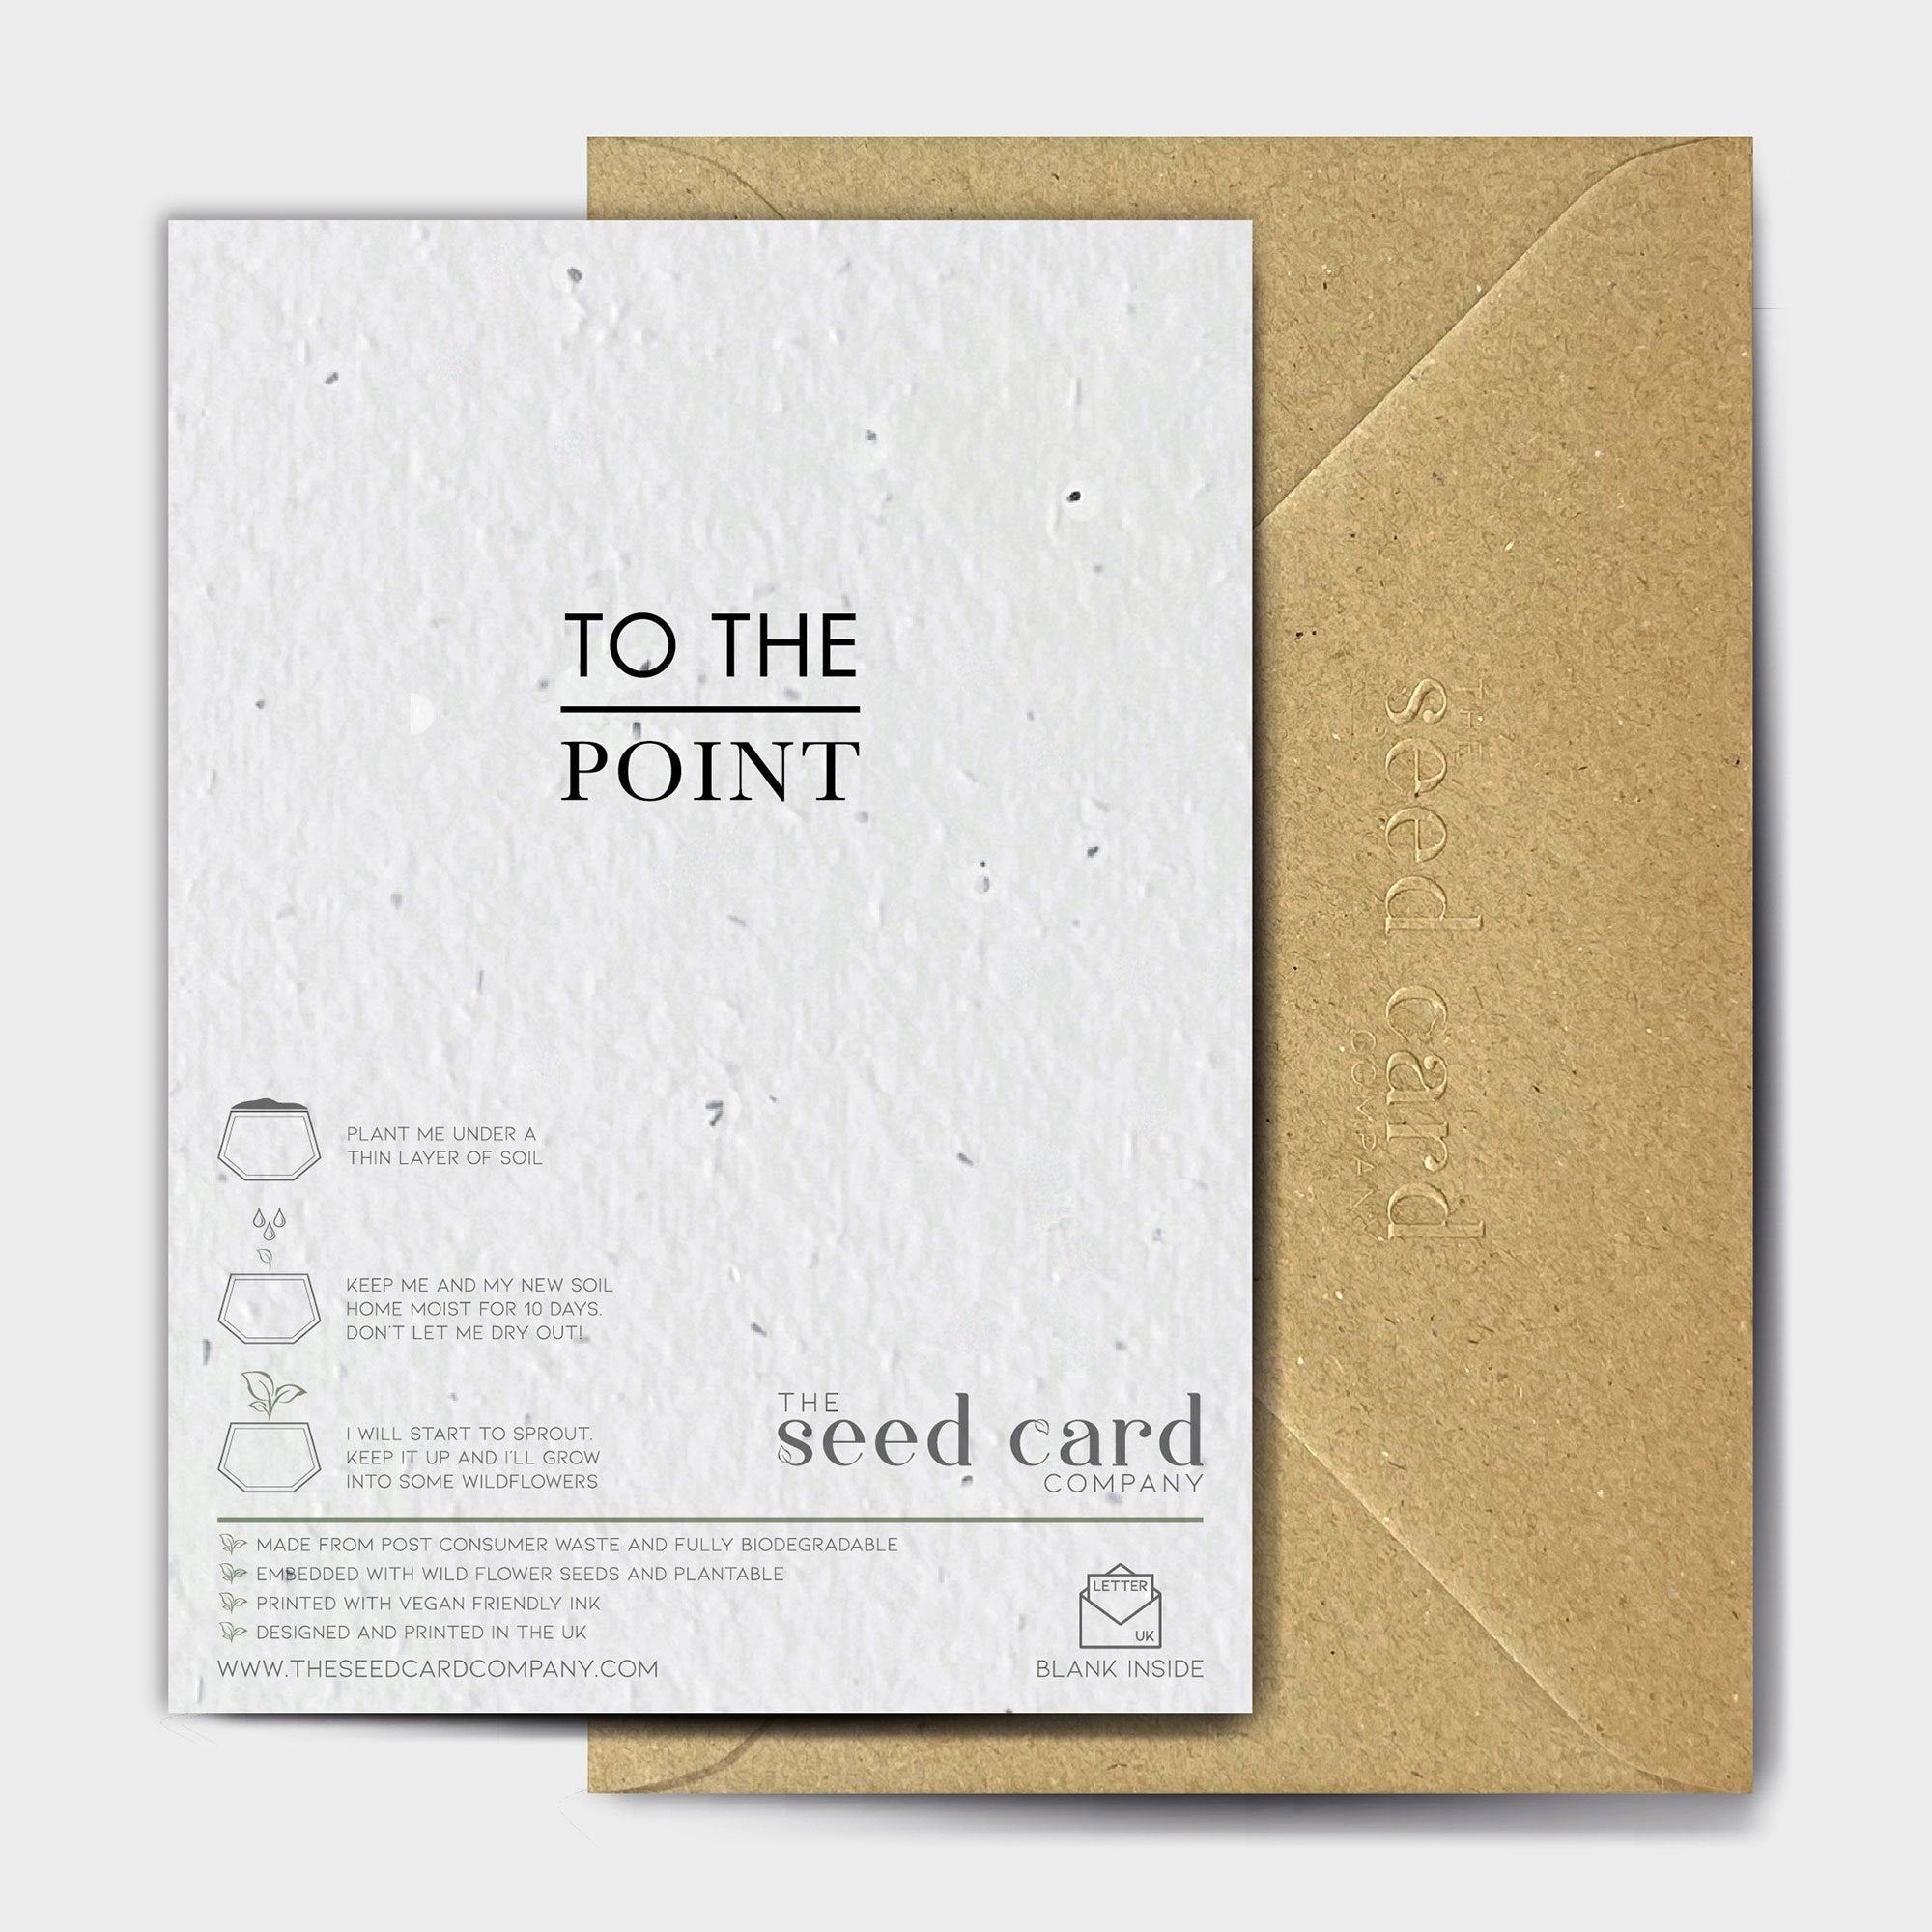 Shop online Not Just A Mother's Day Card - 100% biodegradable seed-embedded cards Shop -The Seed Card Company